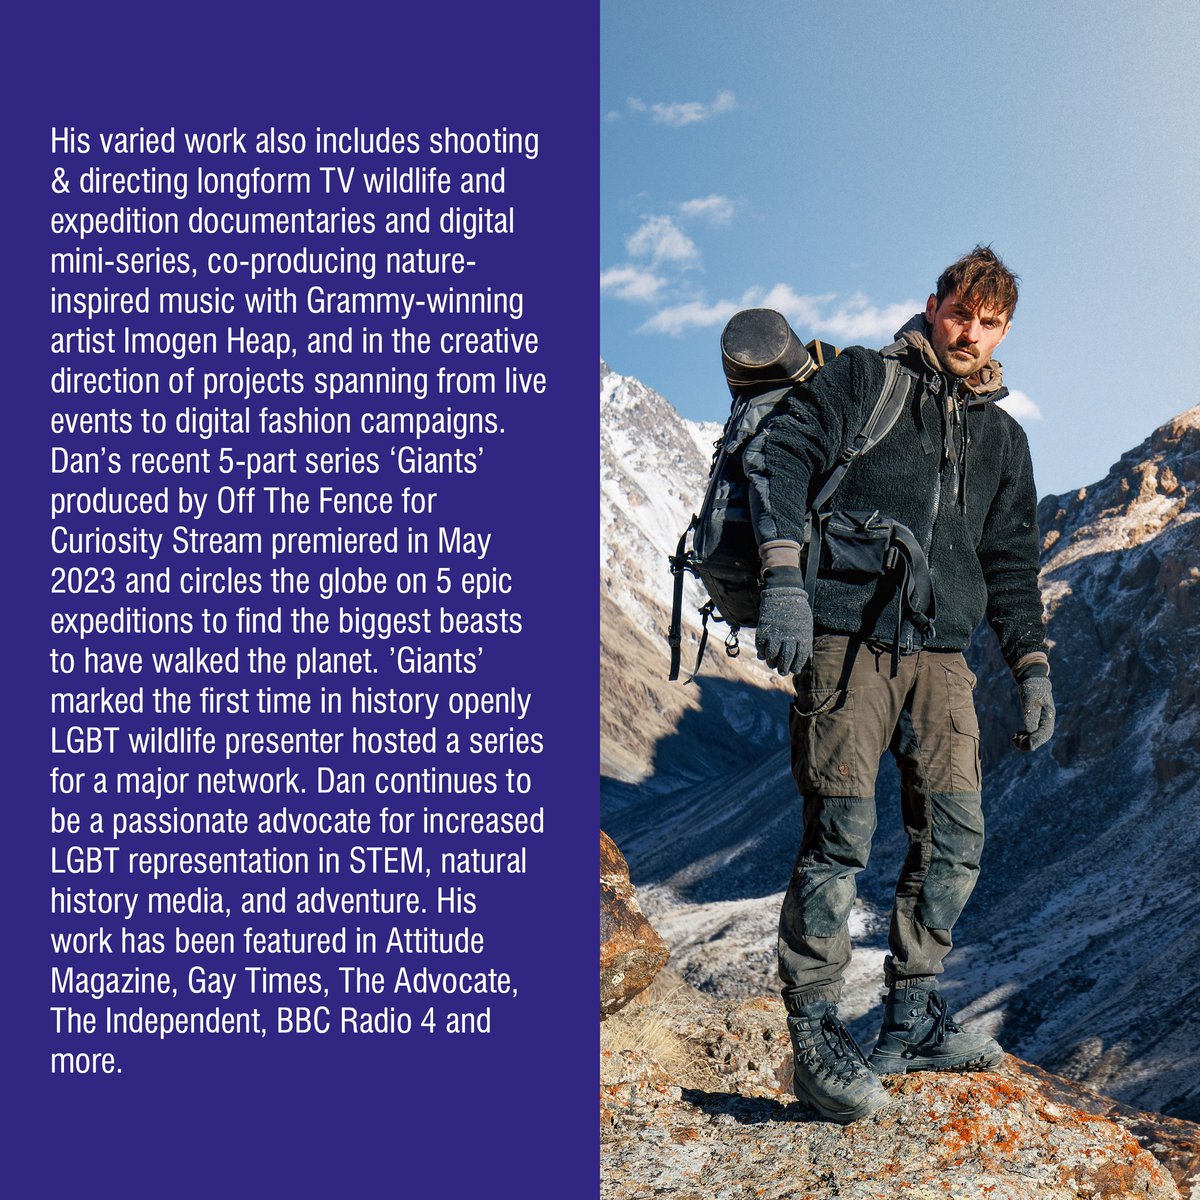 Meet the 2023 Photo Competition Judge - Dan O'Neill! Dan has worked with Opwall on 3 expeditions (Mexico, Guyana and Honduras) and, in his earlier career days, filmed our Guyana video Check out some of his amazing work on his profile - @DanONeill_Wild